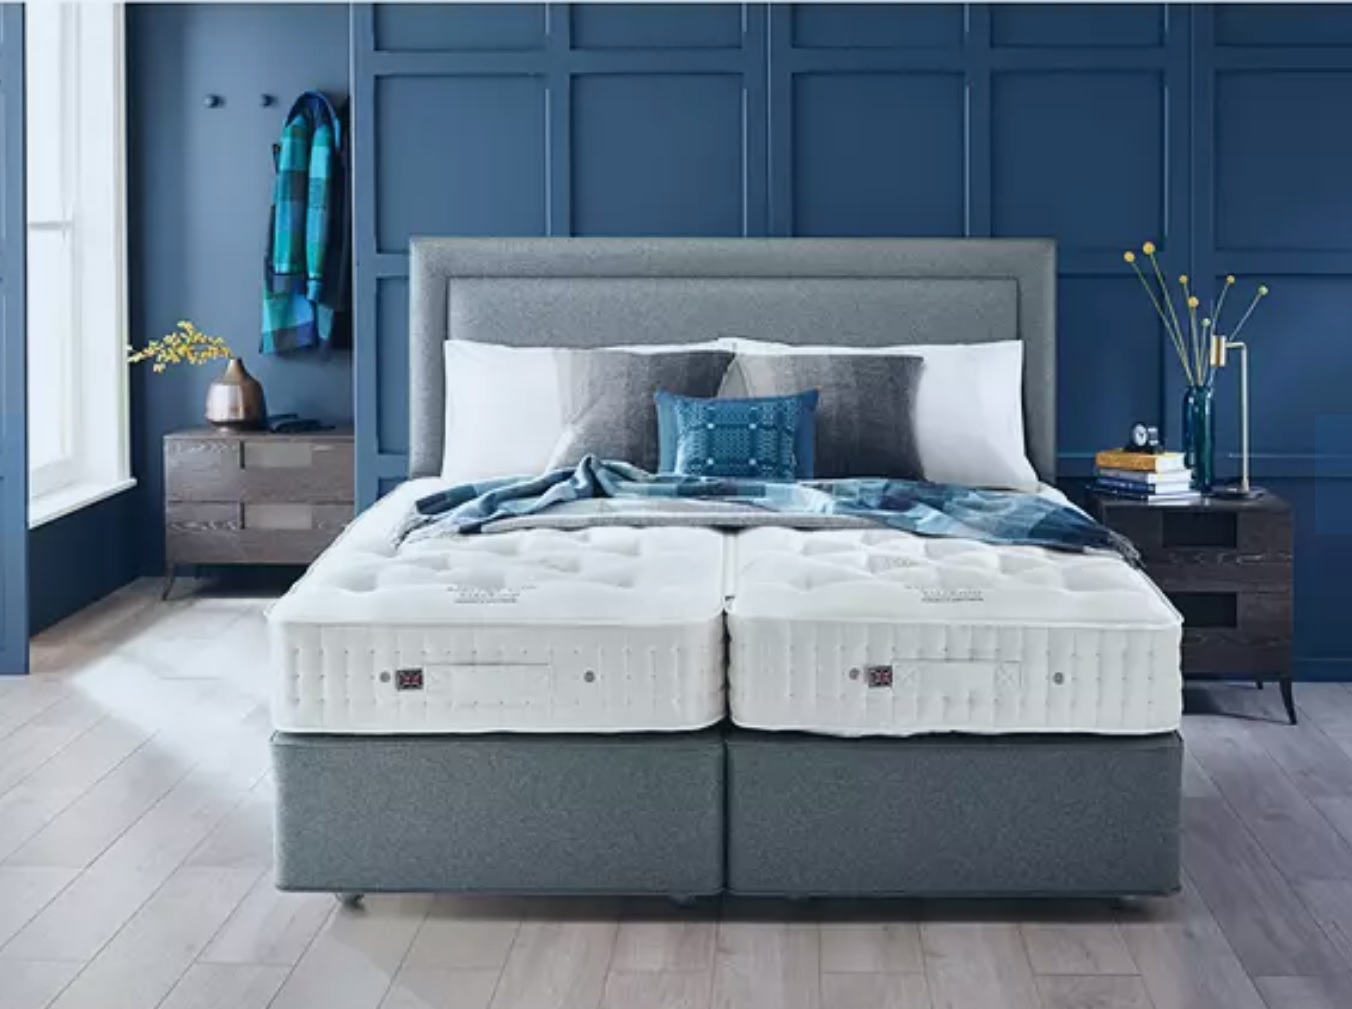 Vispring Zip and Link Super King (2 x100 x 200cm) Hotel Mattress Only with its distinctive - Image 2 of 2